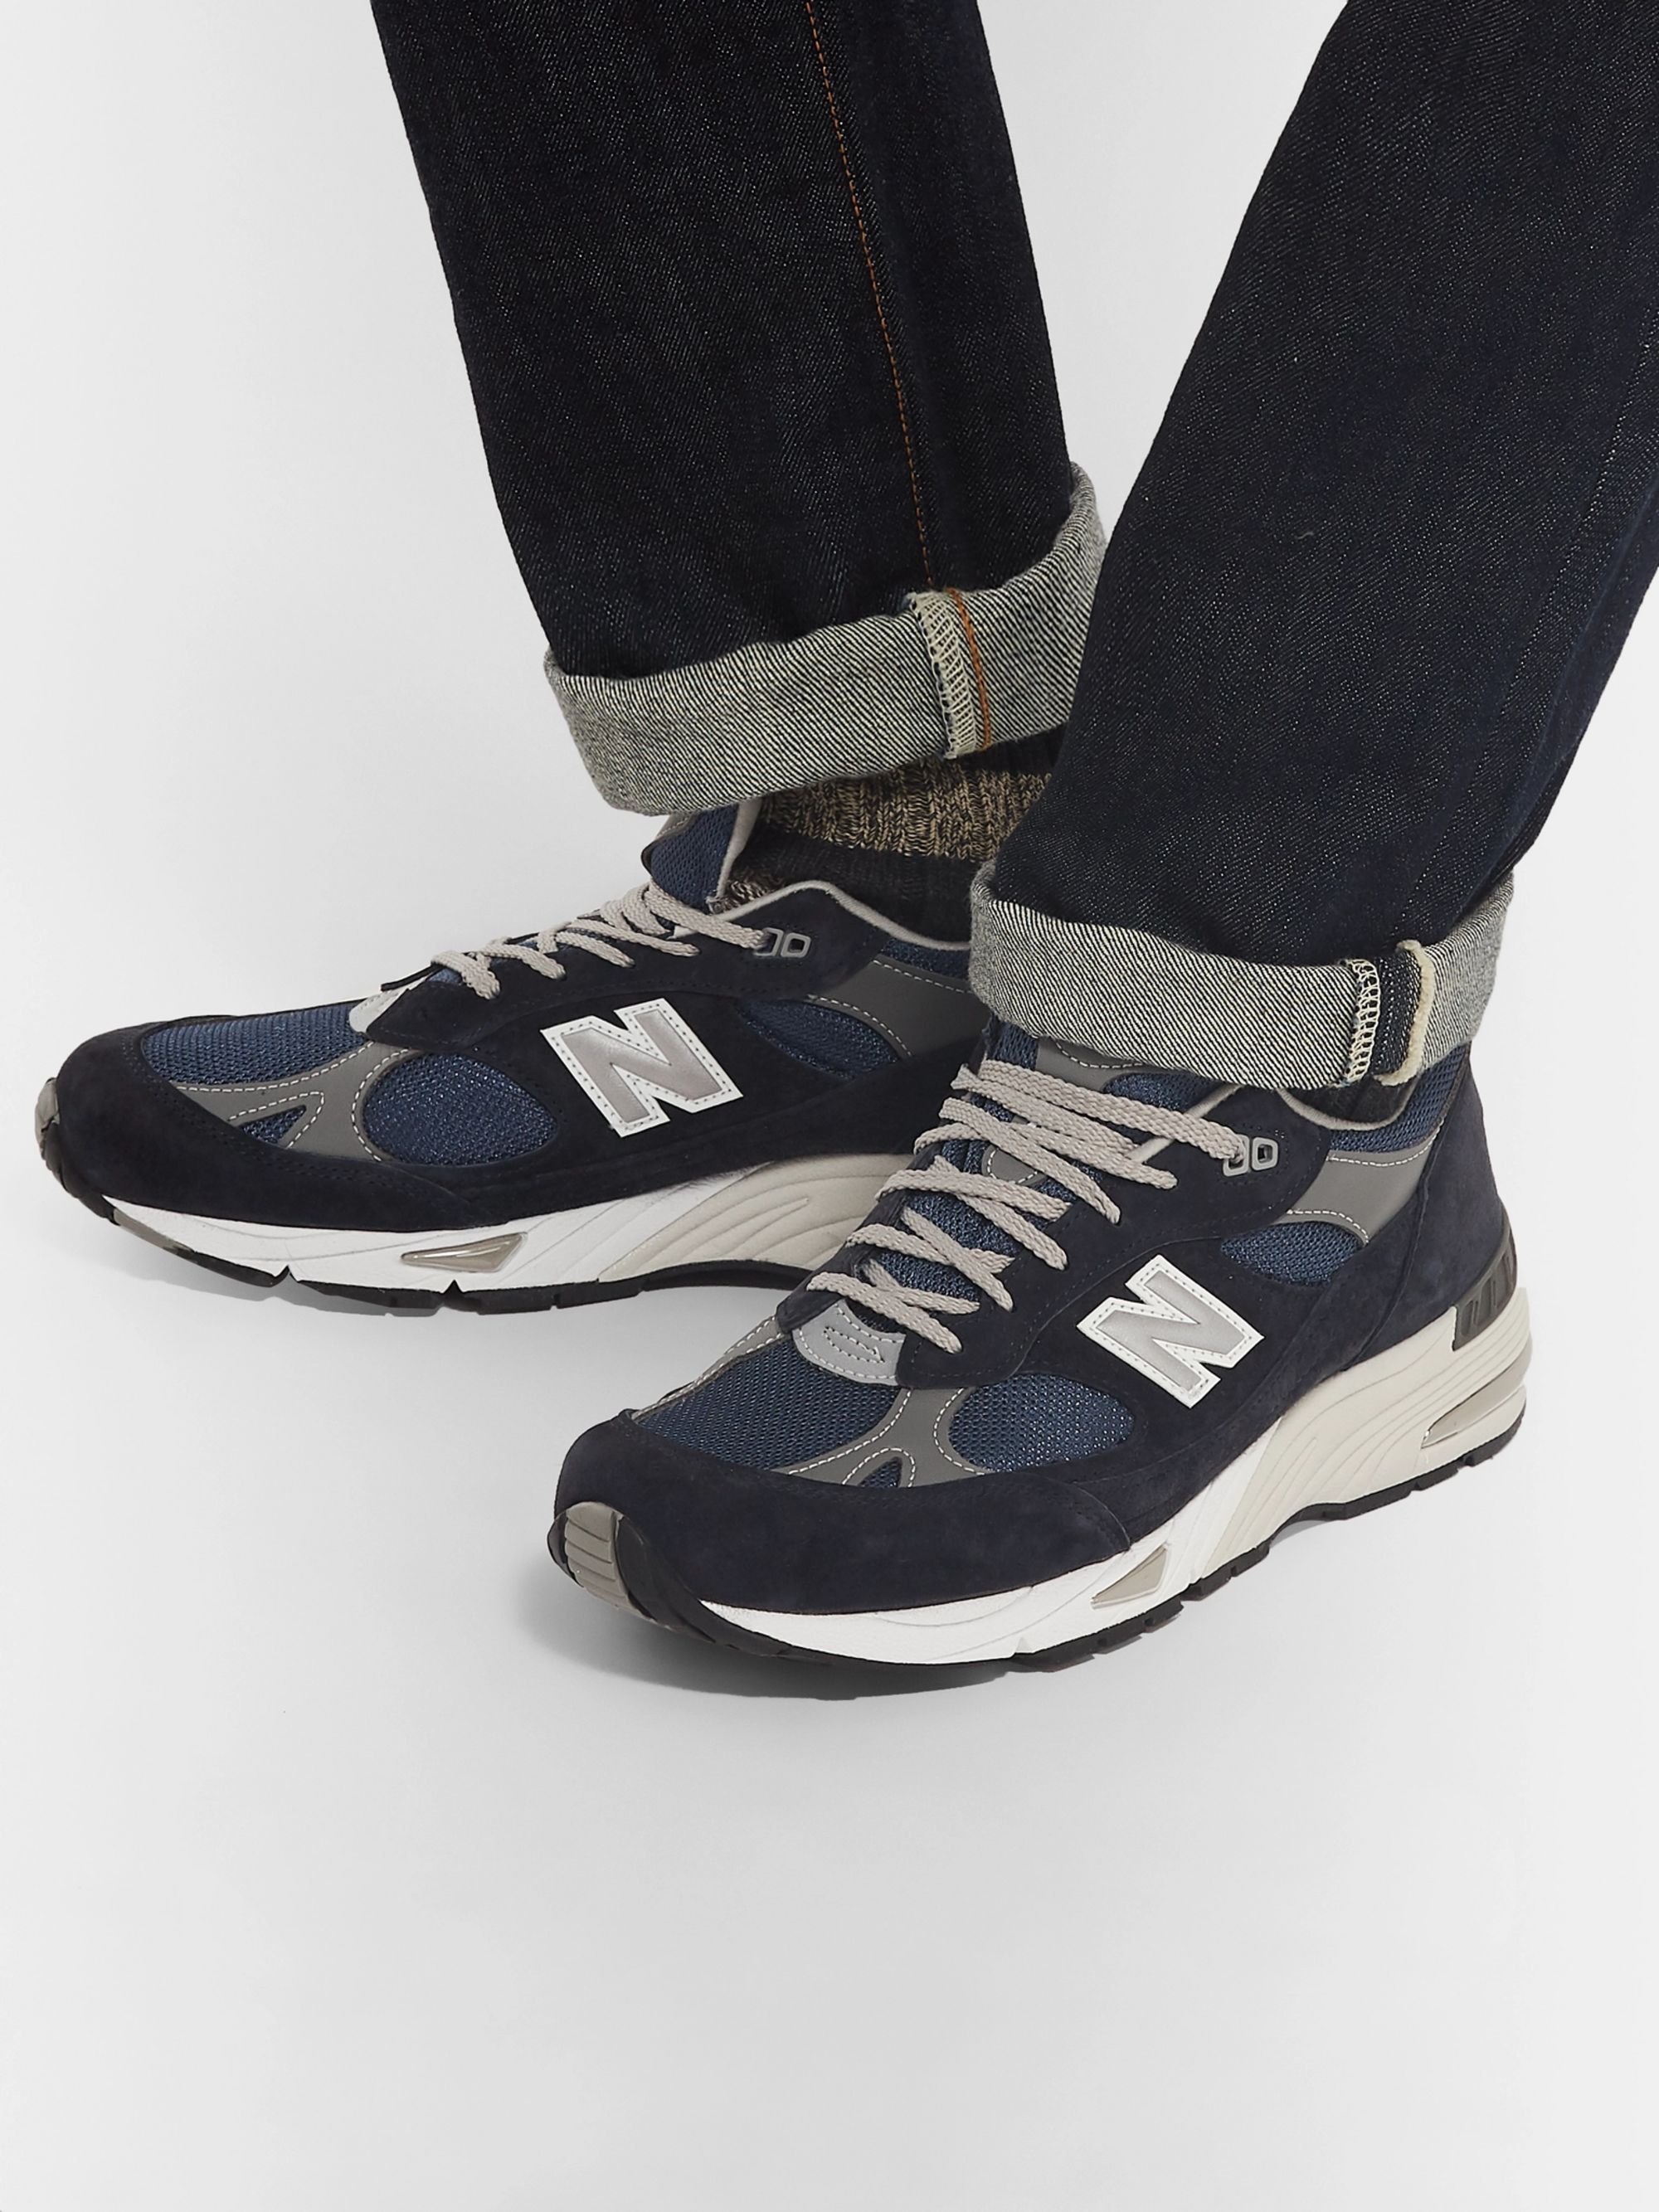 ML991V1 Suede, Mesh and Leather Sneakers